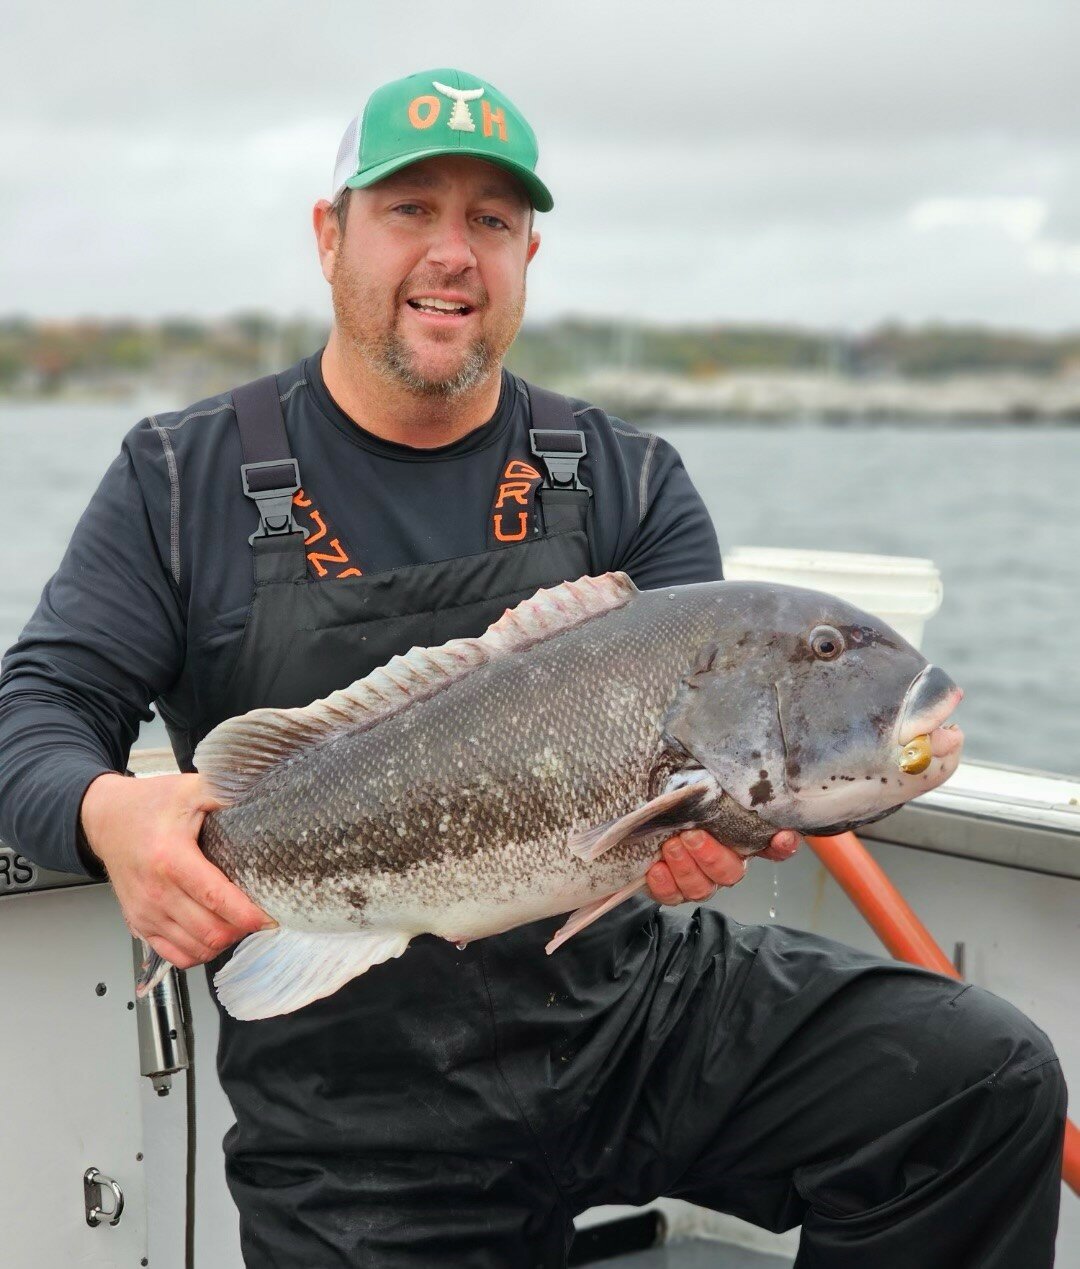 Chris ‘Higgie’ Higgins with the 13.56-pound tautog he caught this week off Newport with Capt. Mike Littlefield of ArchAngel Charters.